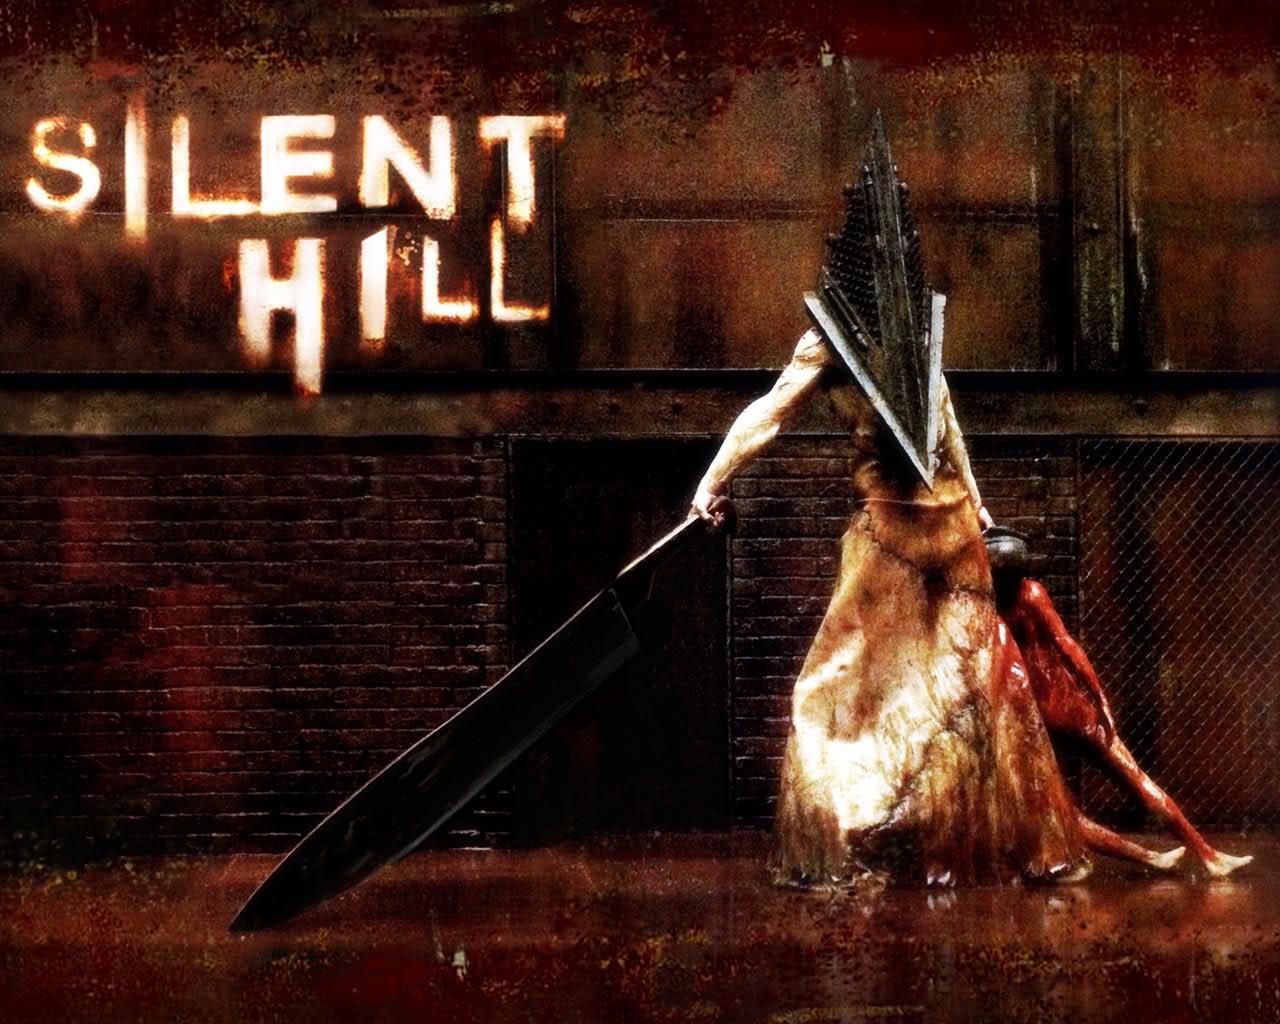 http://www.banzaj.pl/pictures/gry/Galerie/Silent_Hill/silent_hill_film_1.jpg